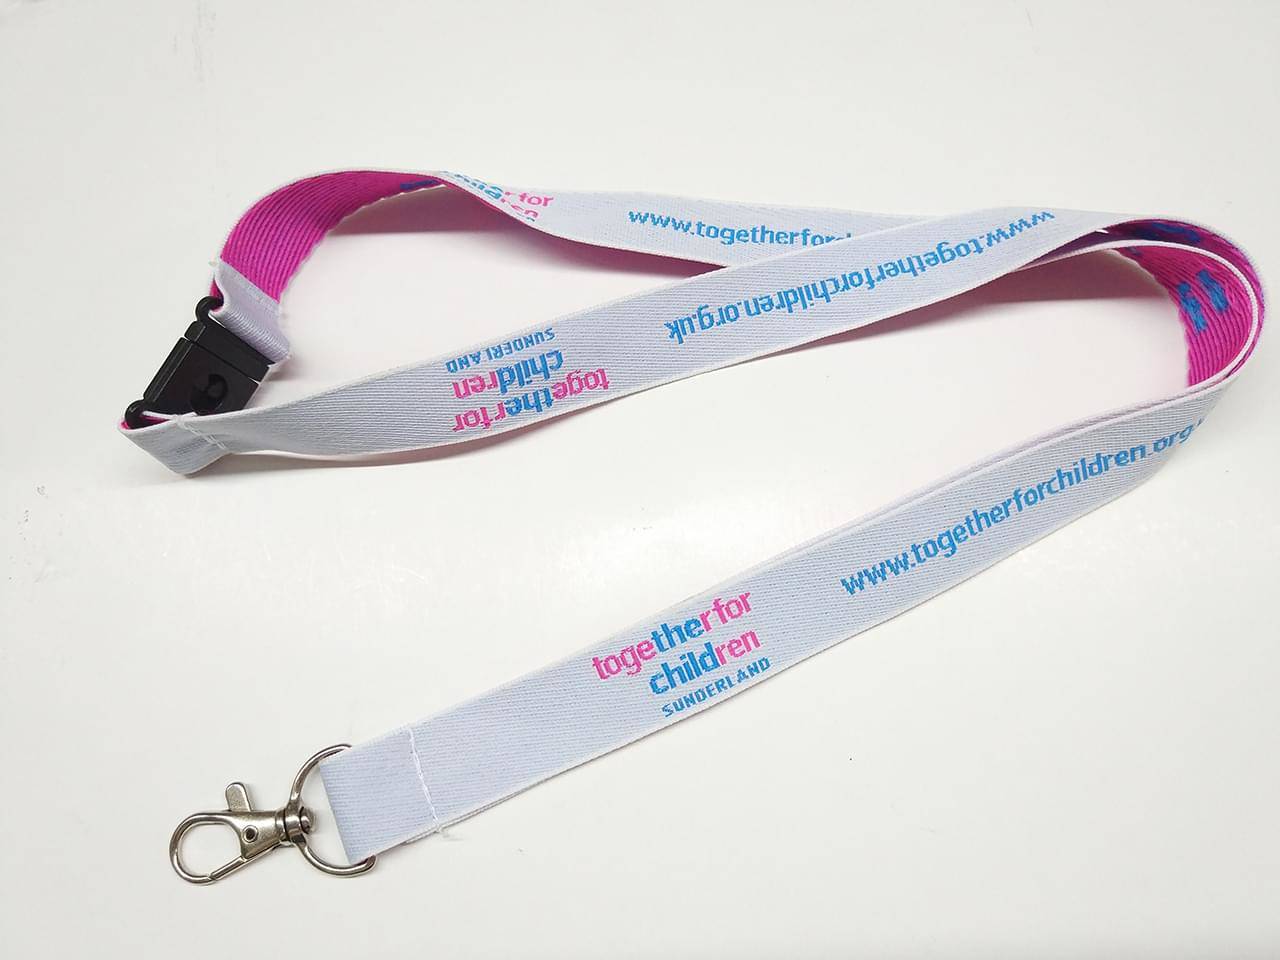 Woven Lanyard with Together for Children logo